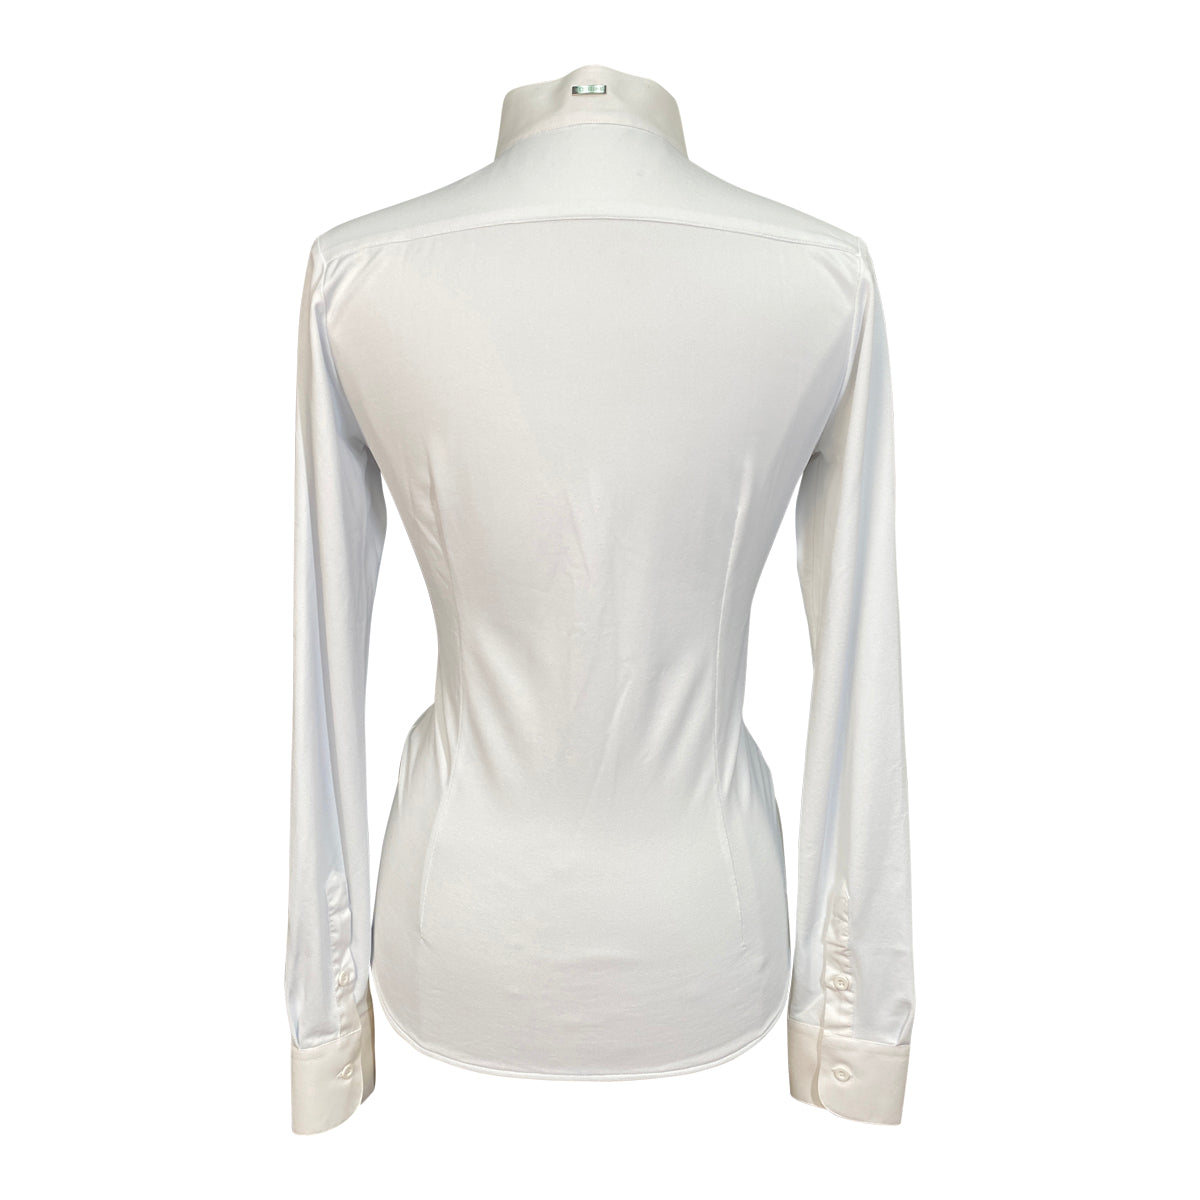 Equiline &#39;Victoria&#39; Long Sleeve Show Shirt in White - Women&#39;s IT 44 (US Large)